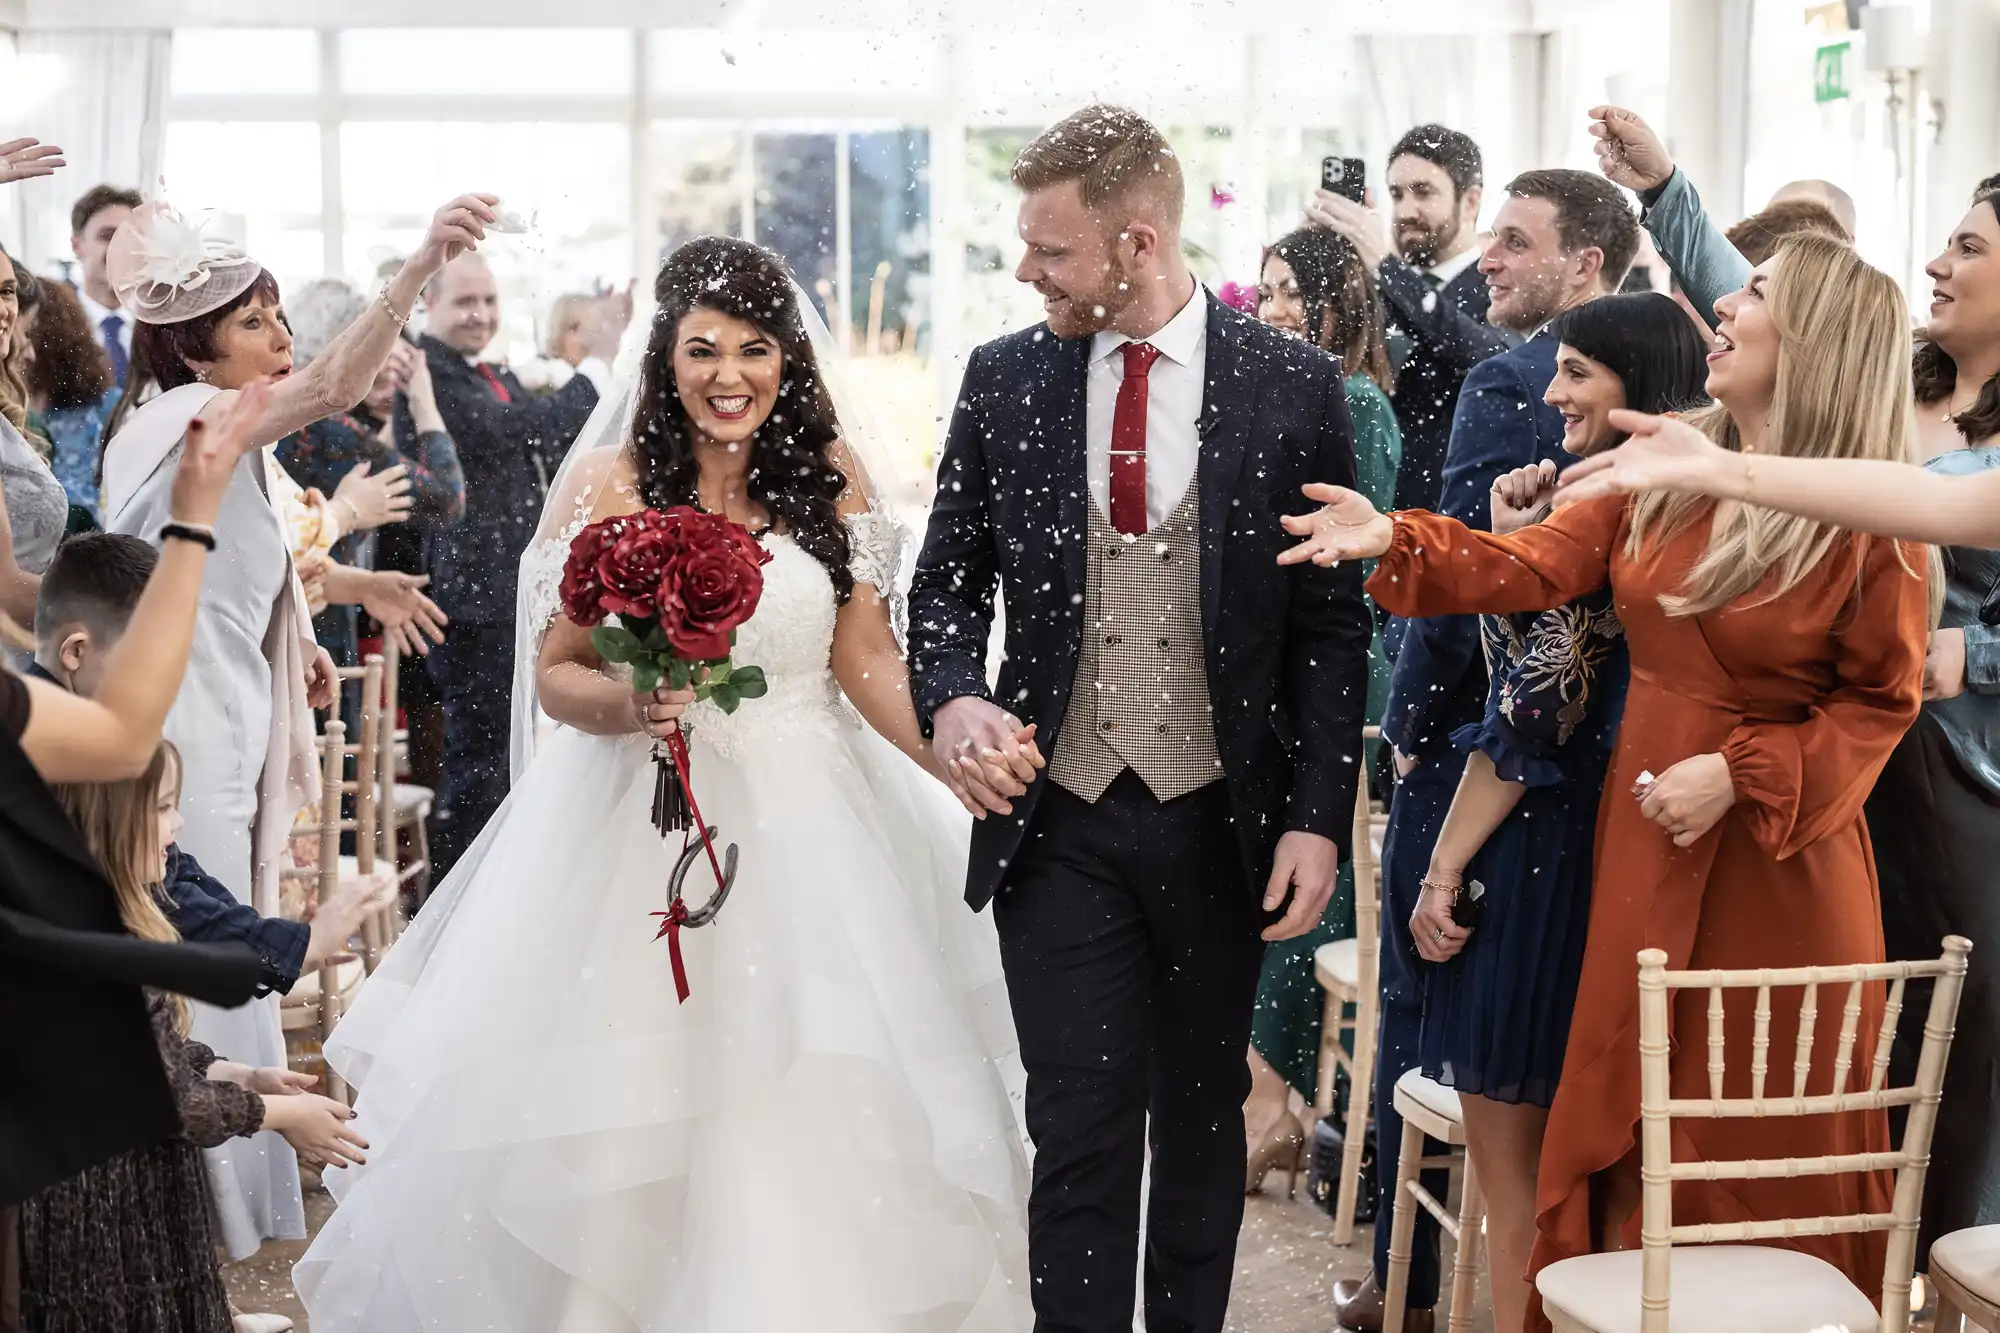 A bride and groom walk down an aisle while guests toss confetti. The bride holds a red bouquet, and both are smiling. Guests on either side are celebrating and taking photos.